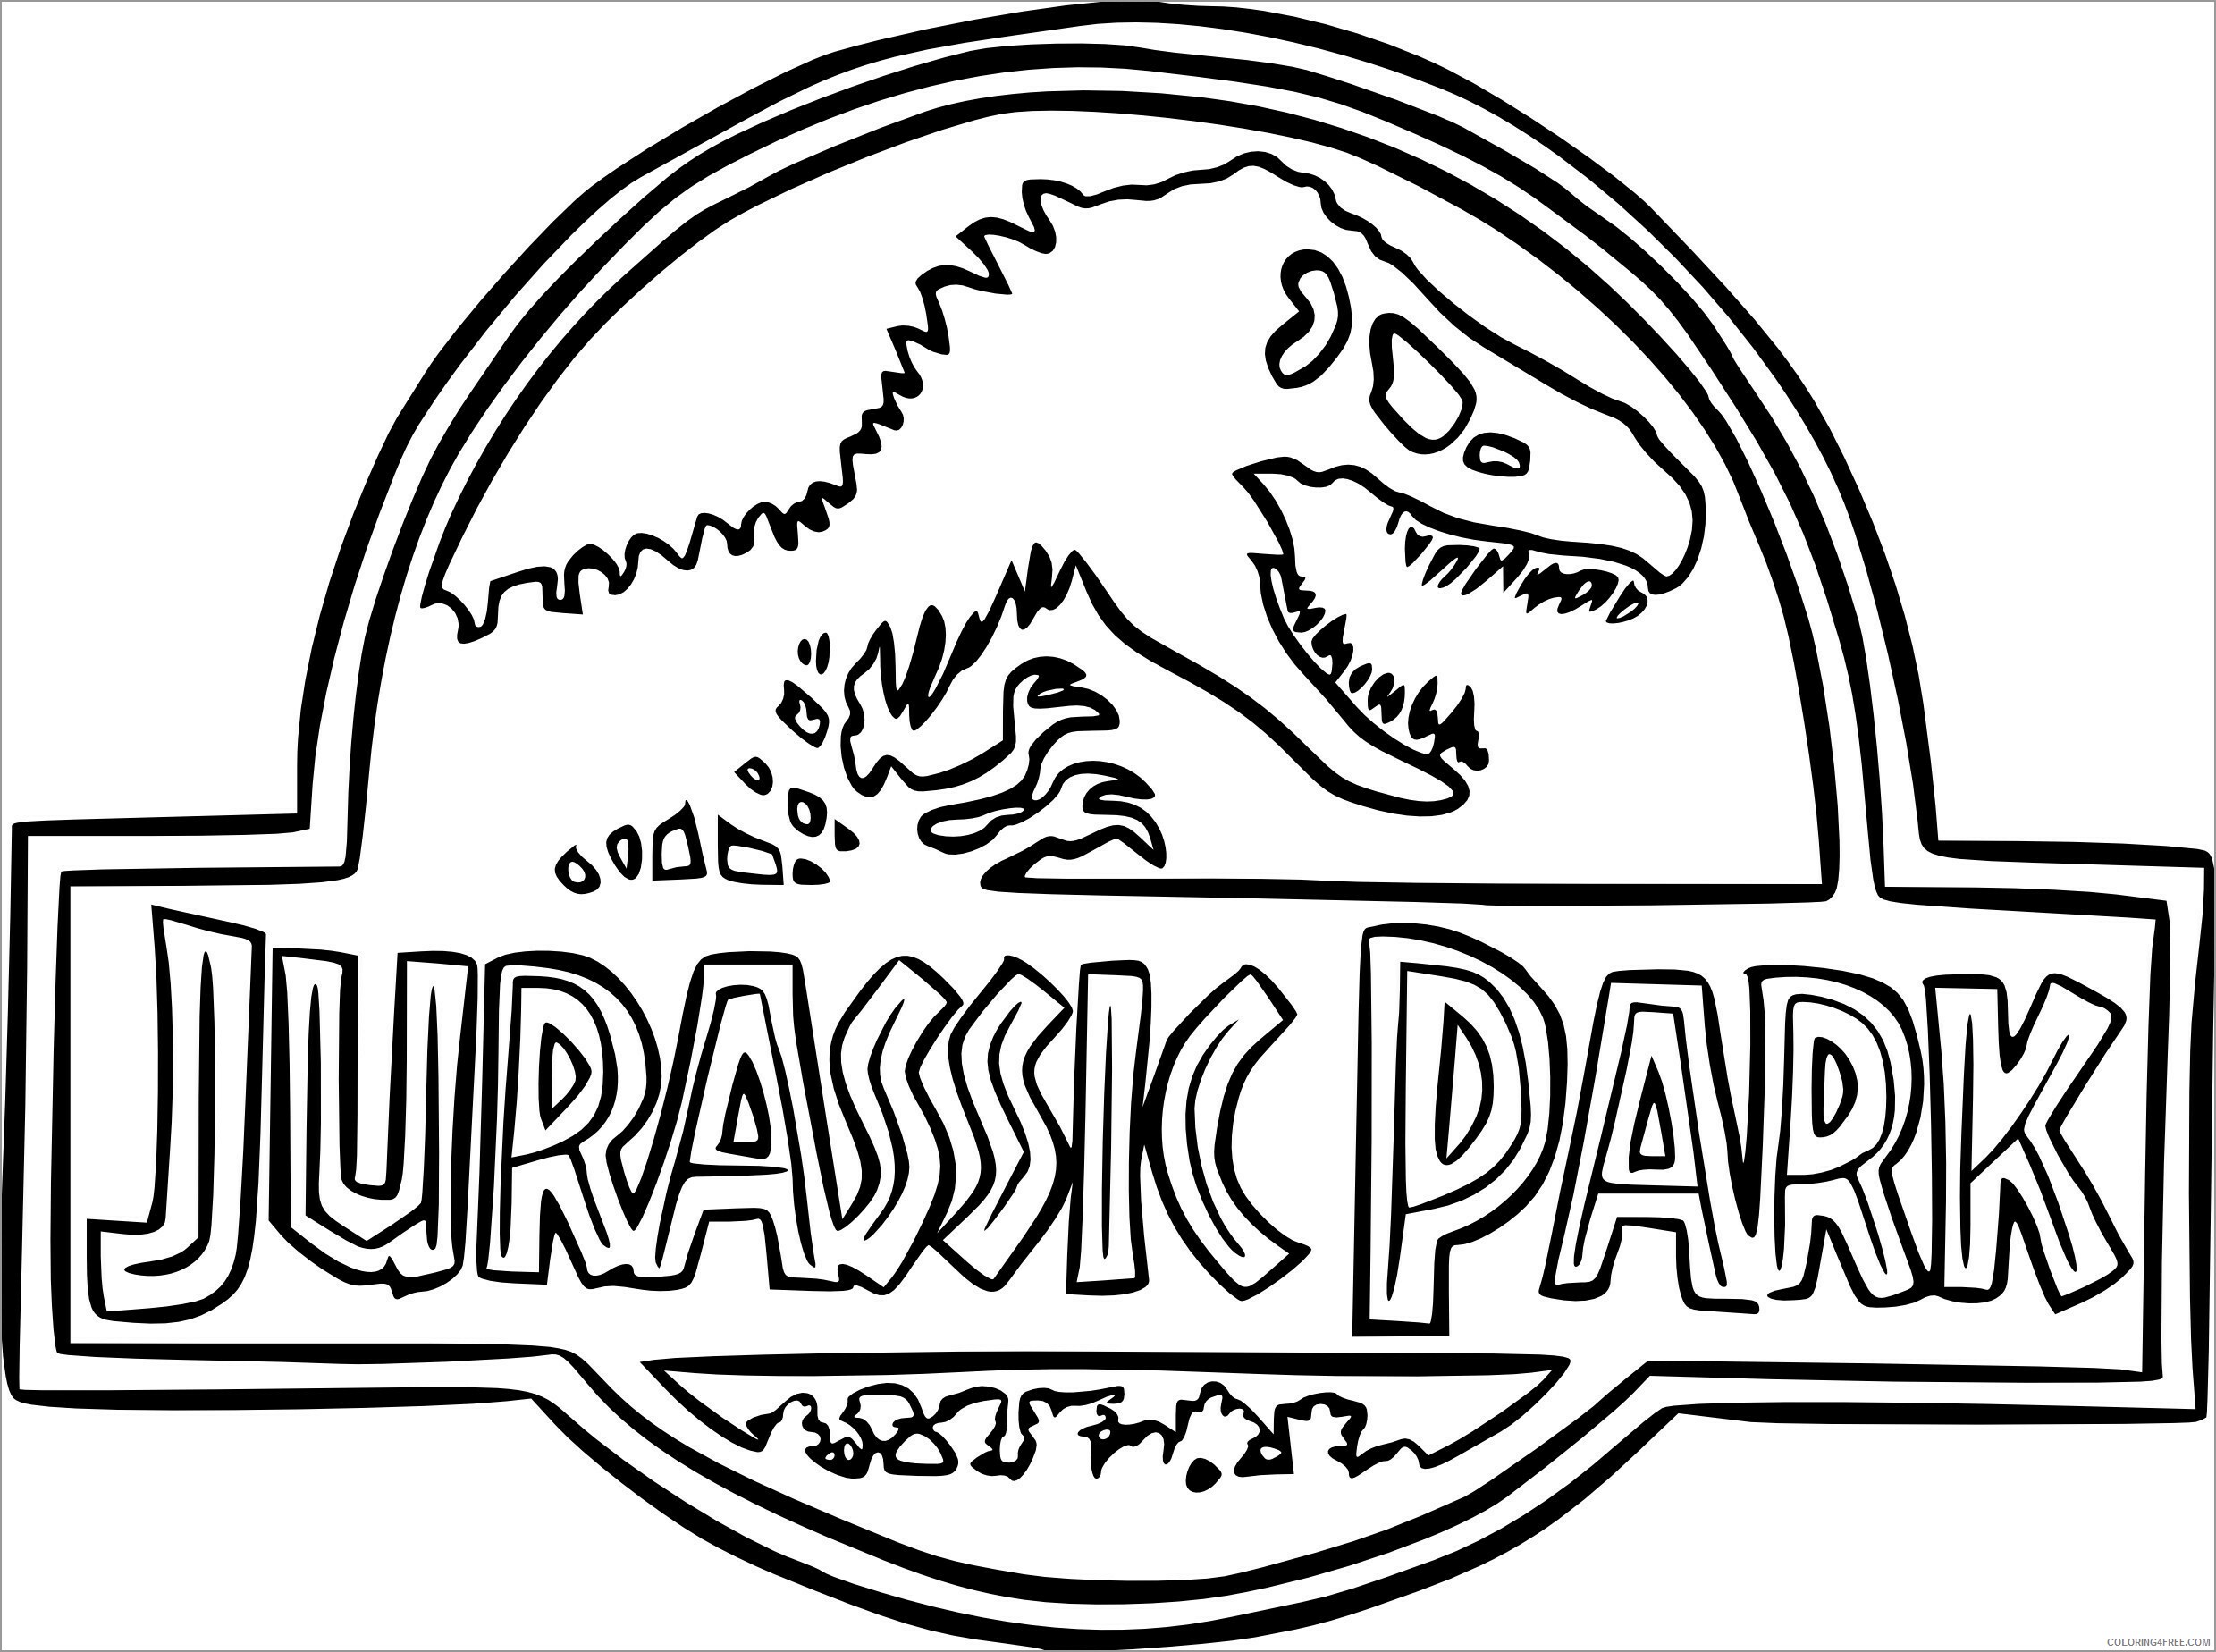 jurassic-world-coloring-pages-for-boys-jurassic-park-logo-printable-2020-0513-coloring4free